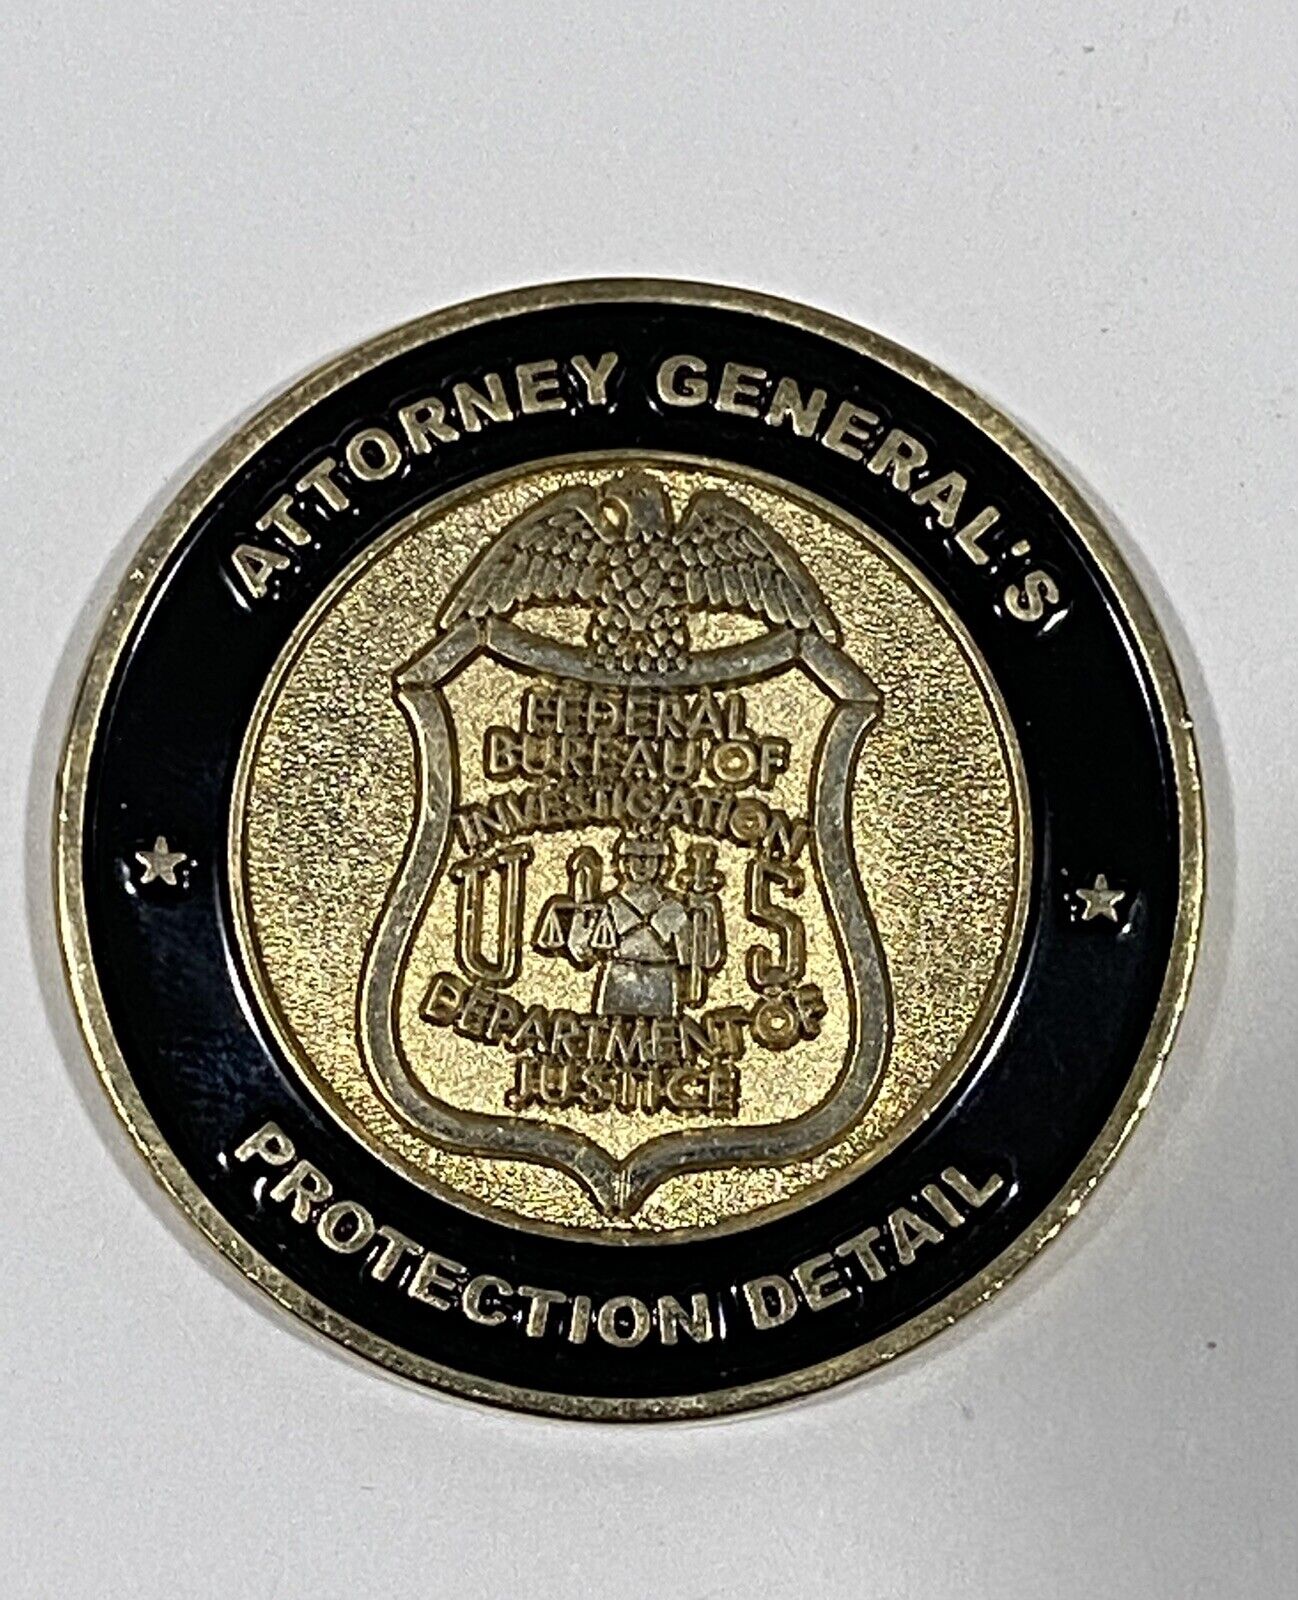 ATTORNEY GENERAL PROTECTION DETAIL CHALLENGE COIN - Rare DOJ / FBI Coin